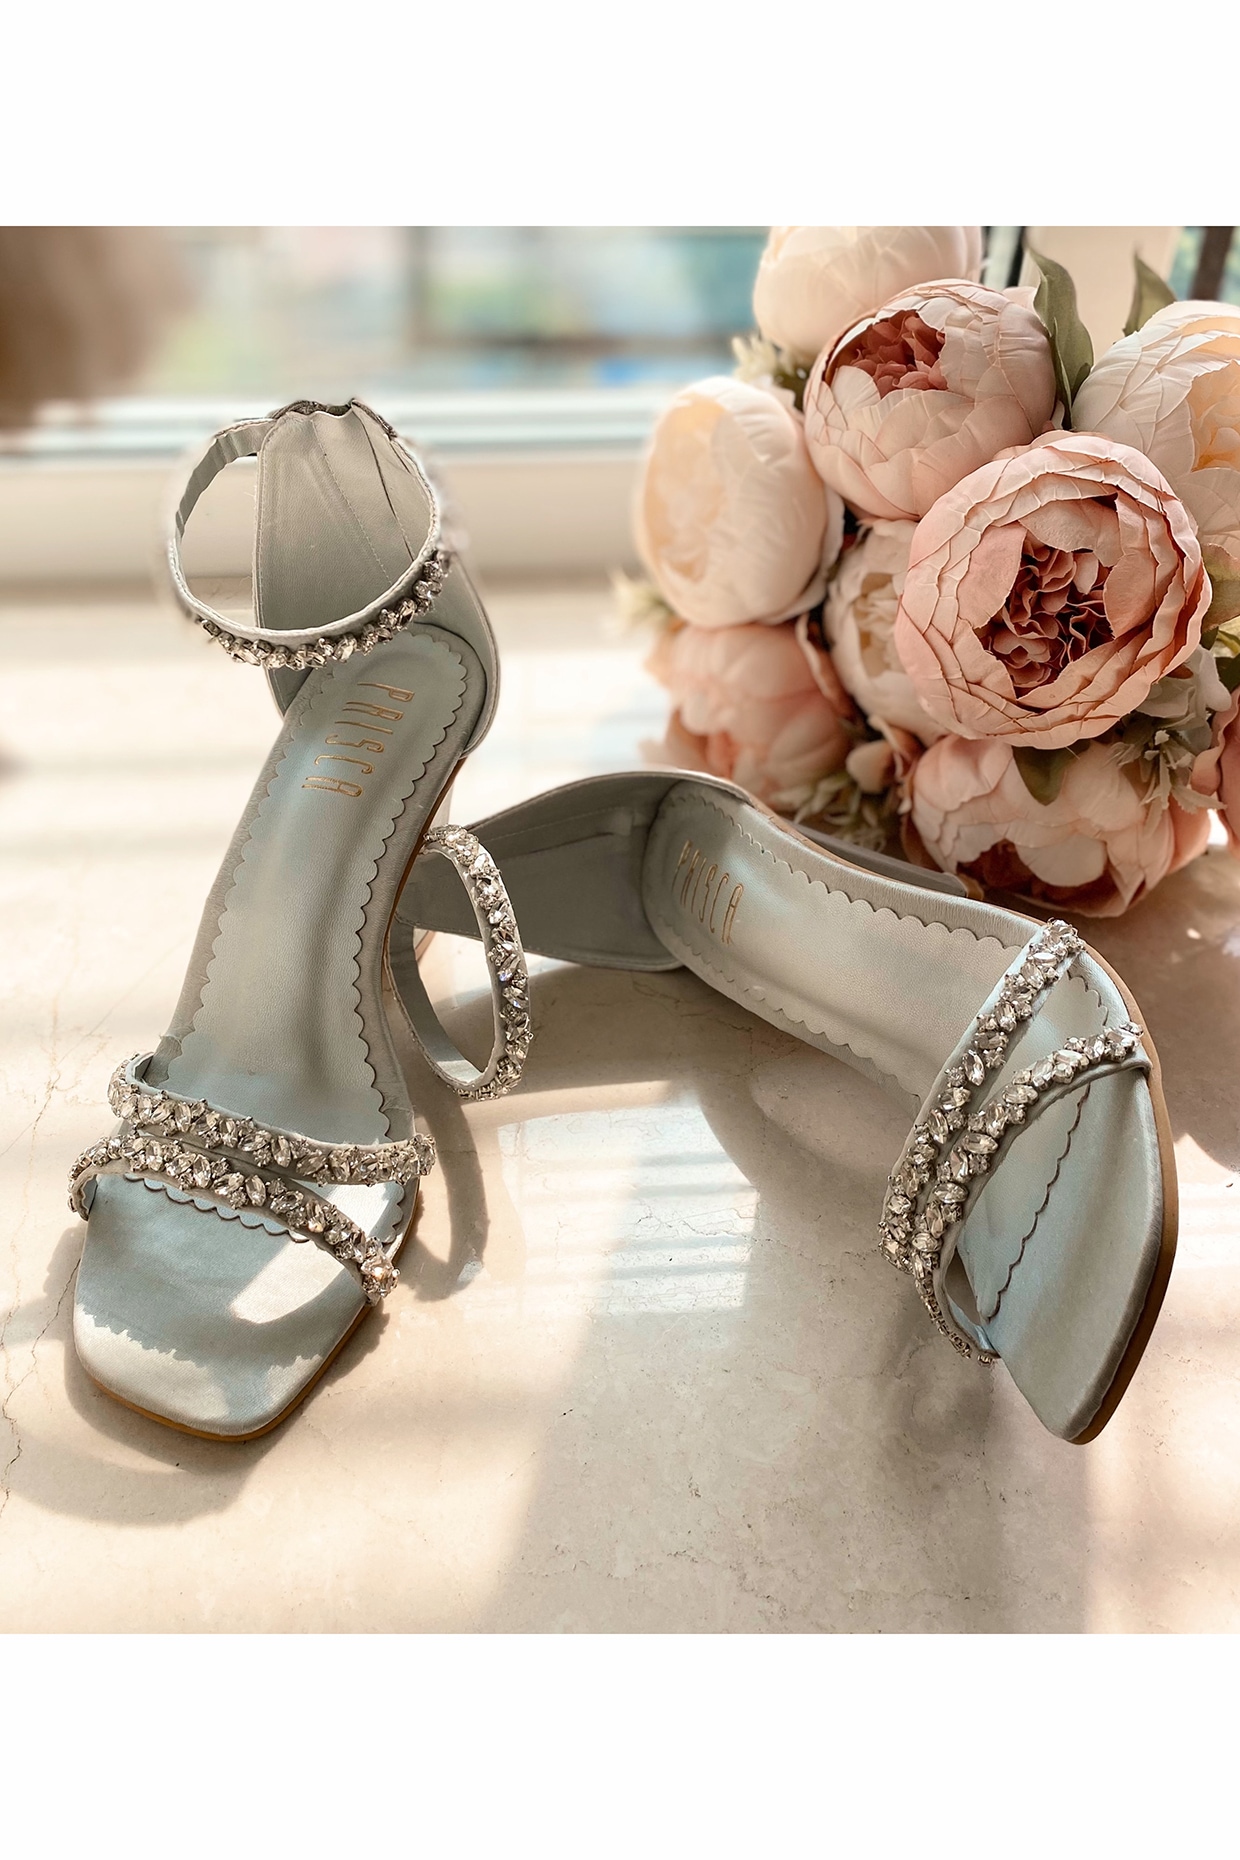 Diamond Heels - How cute is this silver glittery Lame fabric 4 inch heel??⁣  ⁣ CLASSIQUE-20⁣ ⁣ Sizes 5-16⁣ ⁣ Various colours and sizes to try on in The  Shoe Room ❤️ #pointed-toe #4inch #Classique20  #classicheeltohaveinyourcollection | Facebook